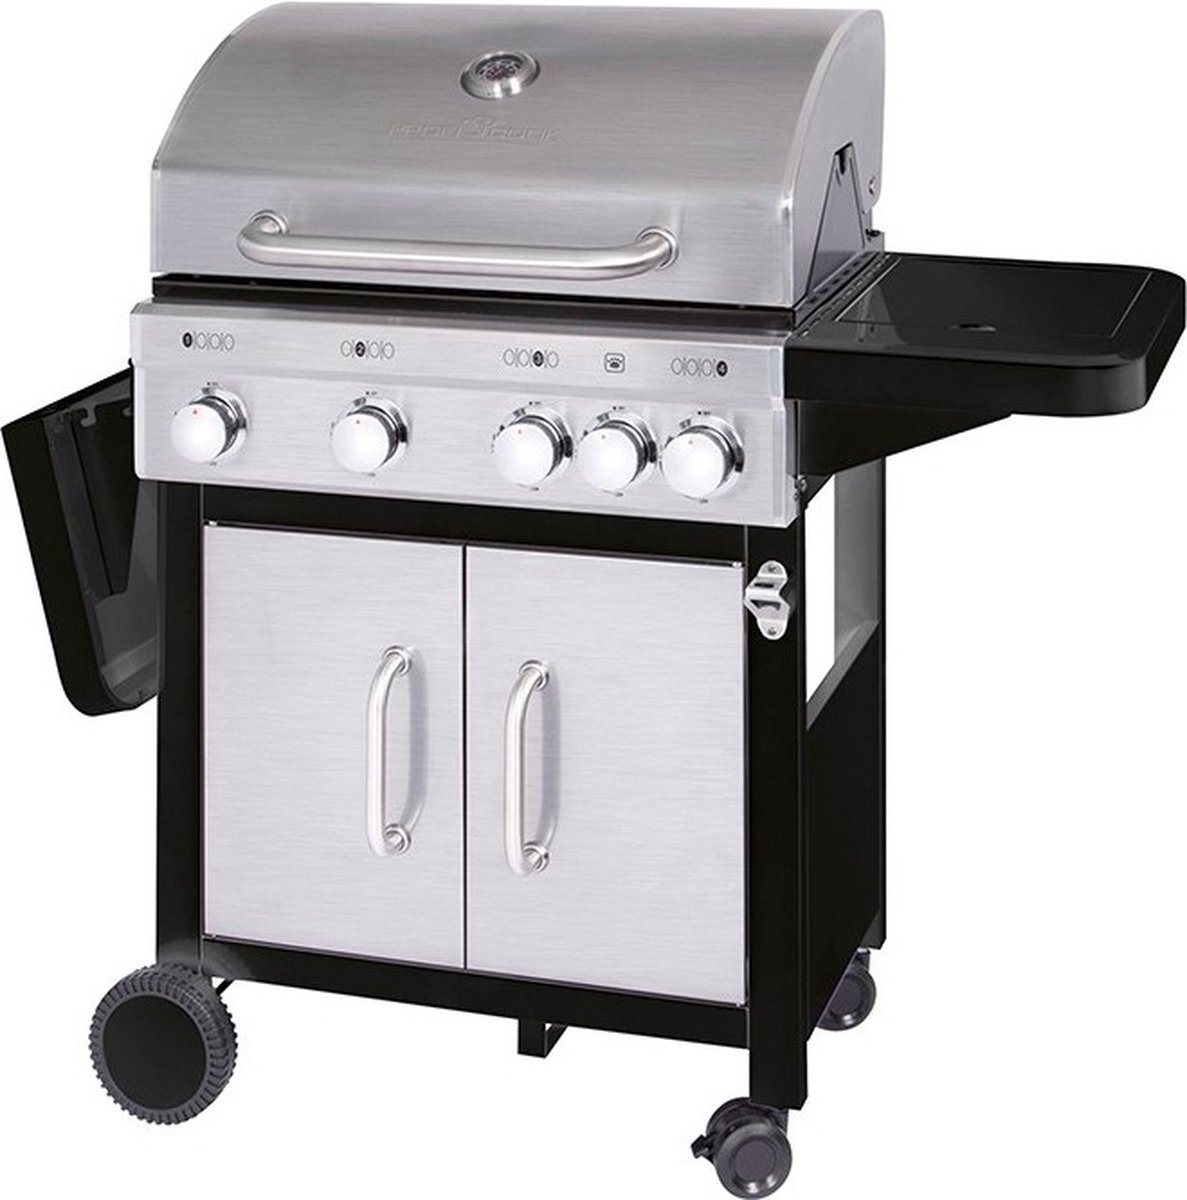 Gas Grill Proficook PC-GG 1206